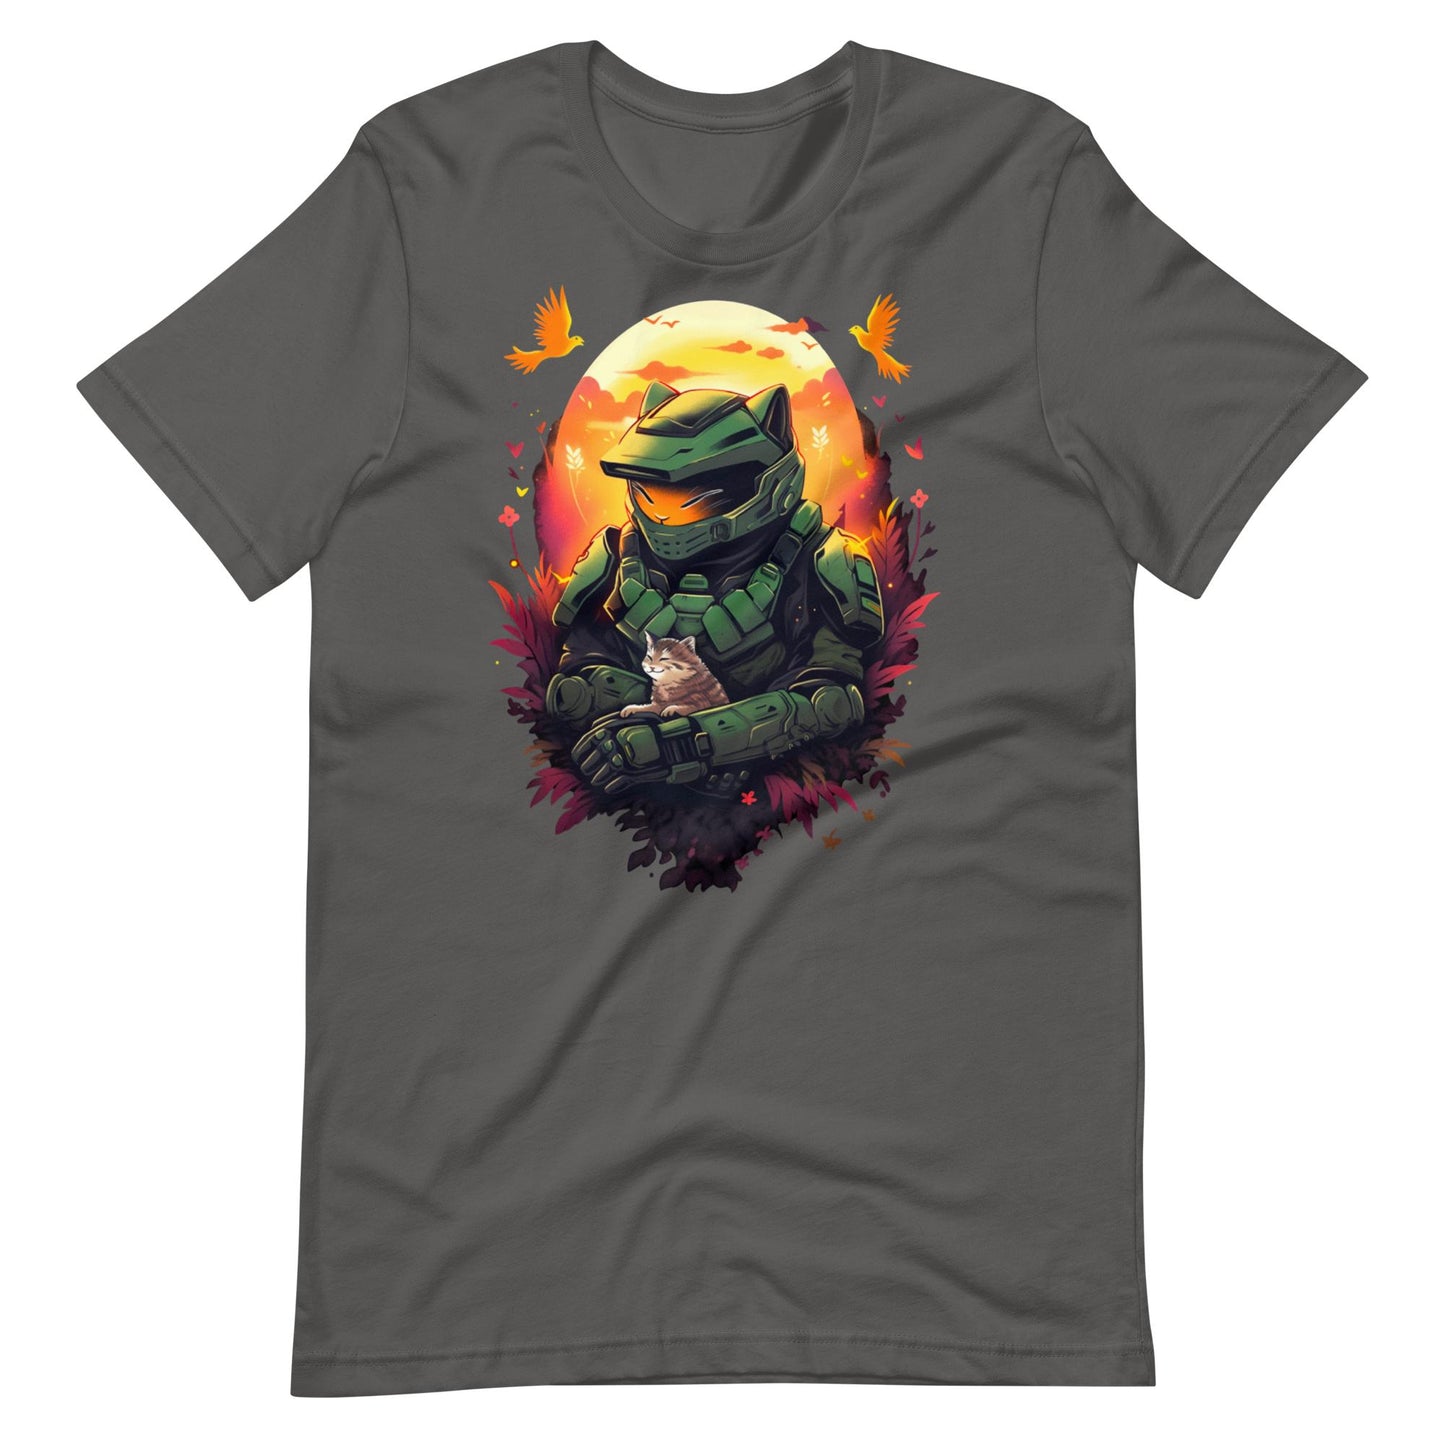 Meowster Chief T-Shirt